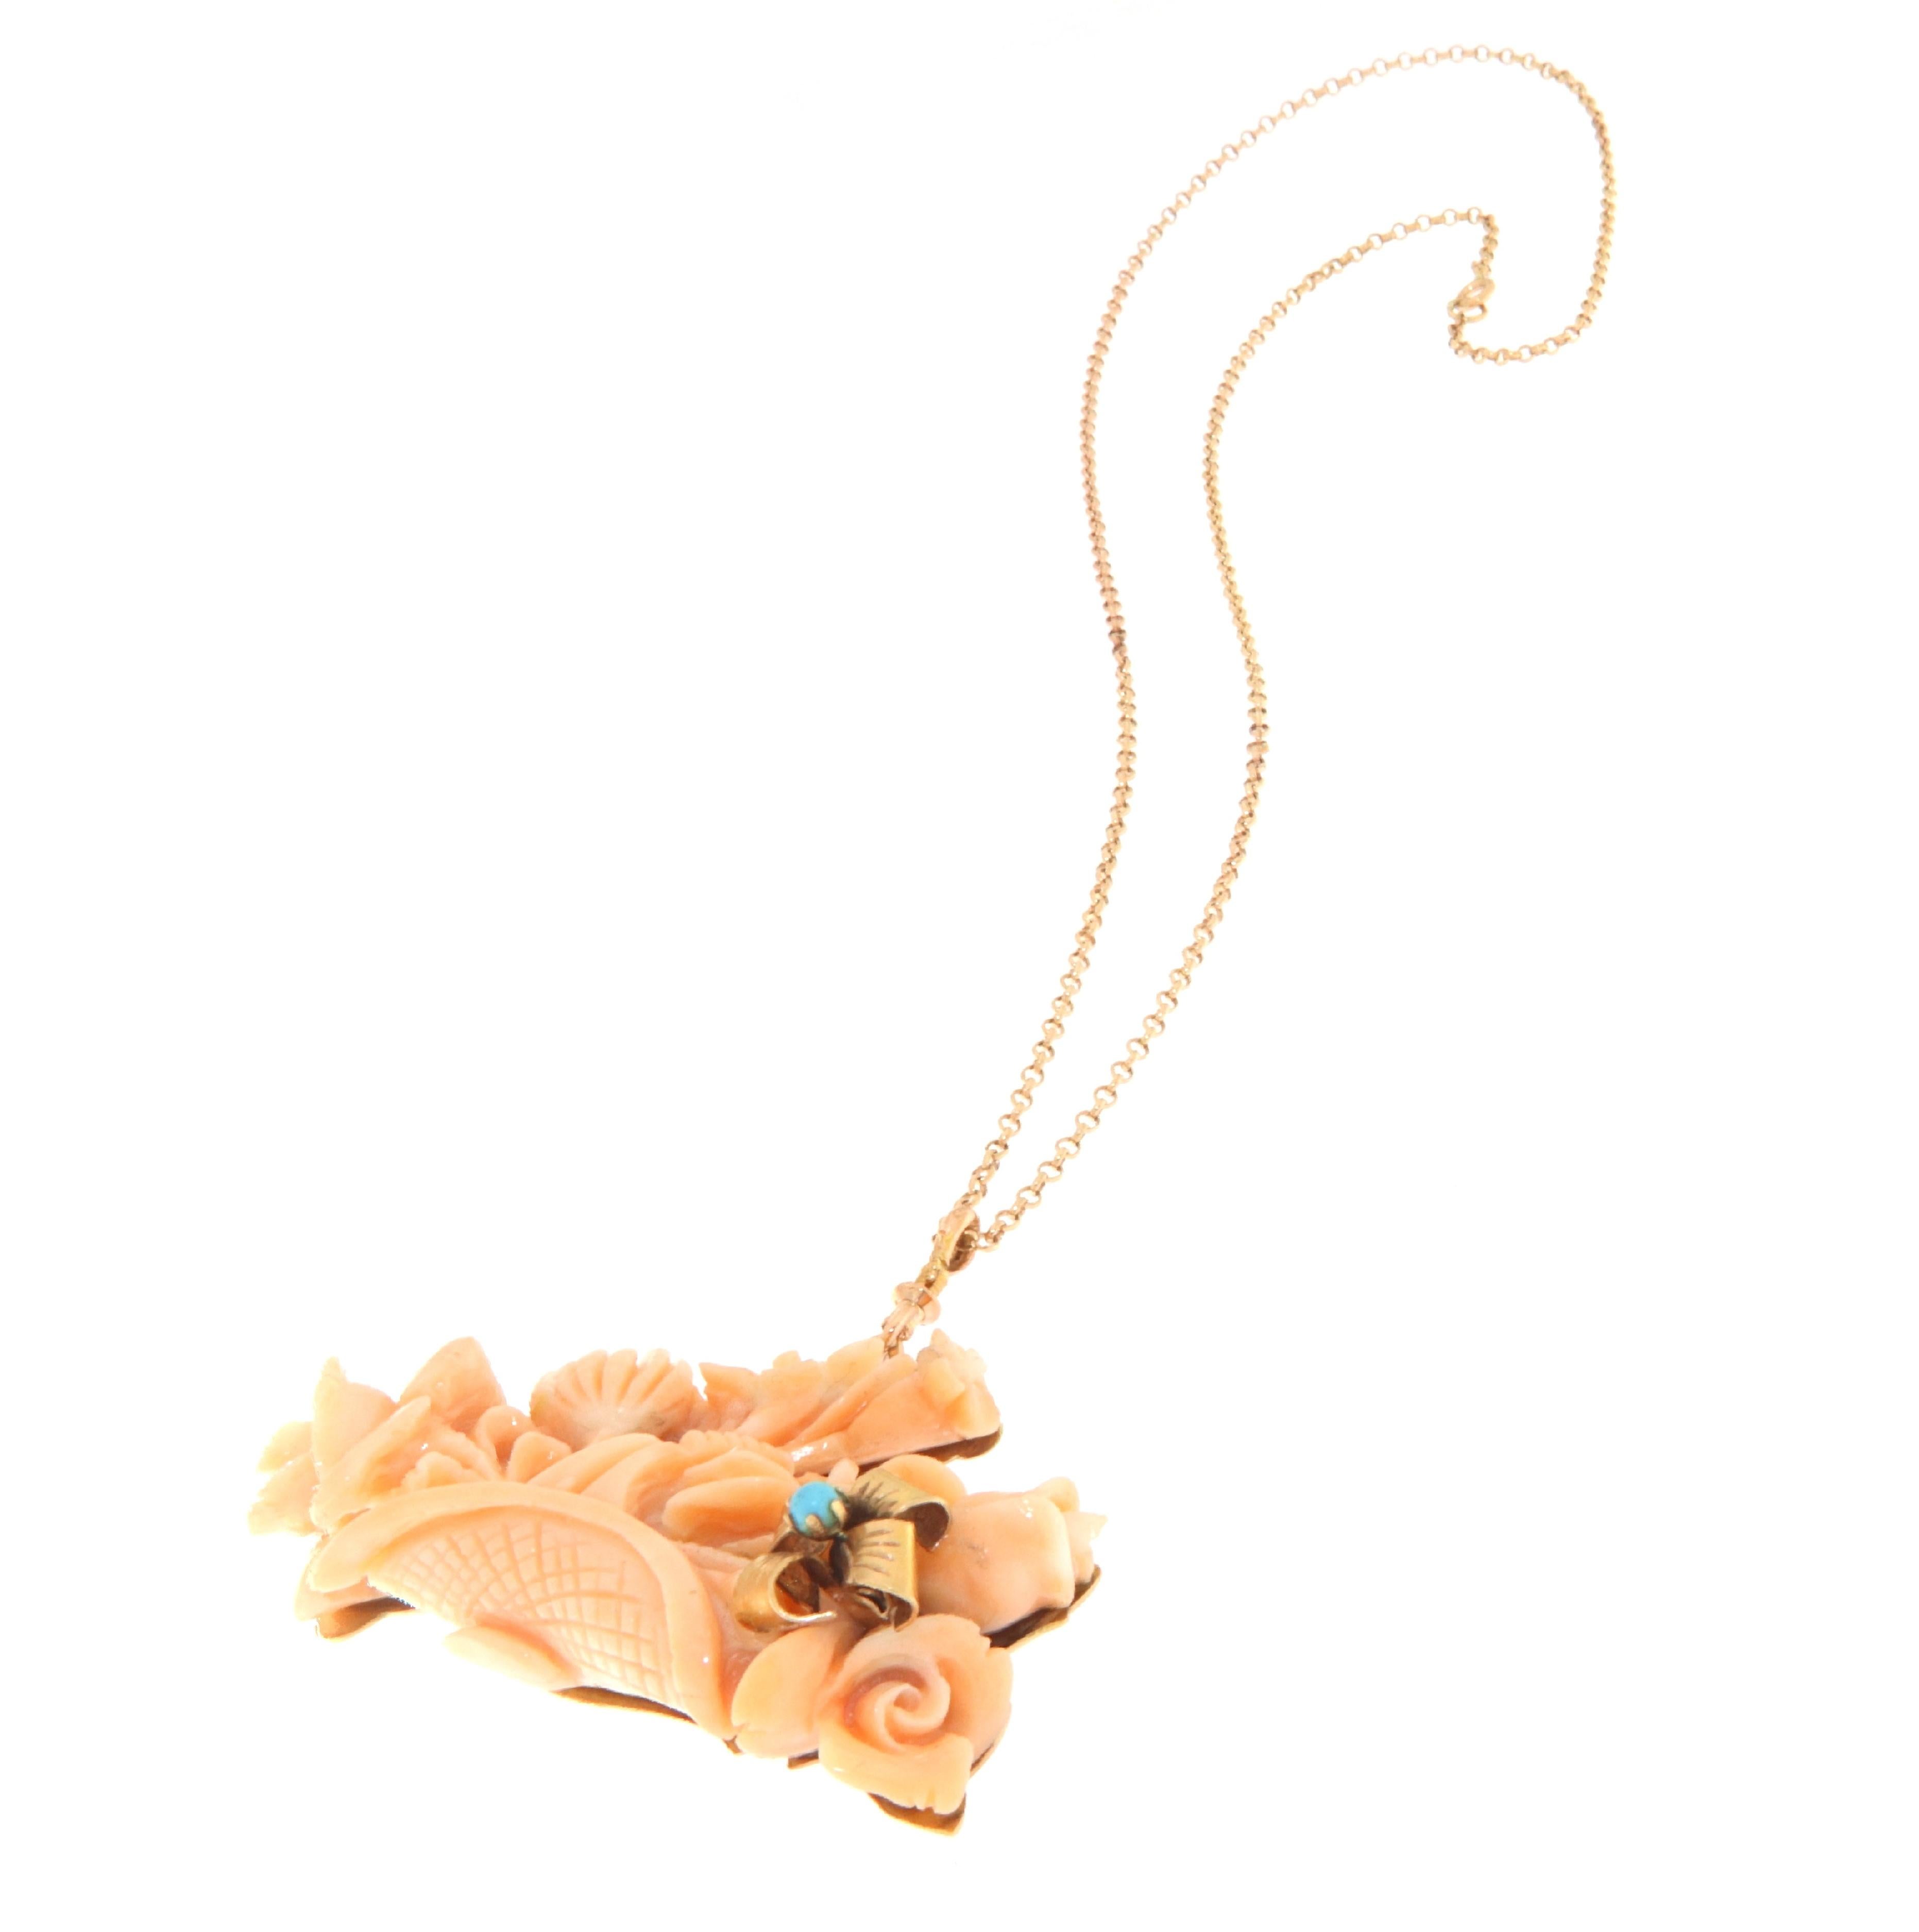 This exquisite necklace, crafted in 14-karat yellow gold, features a central piece of coral, intricately carved into a delicate bouquet of flowers and foliage, displaying the natural beauty and depth of the coral. A small turquoise stone is